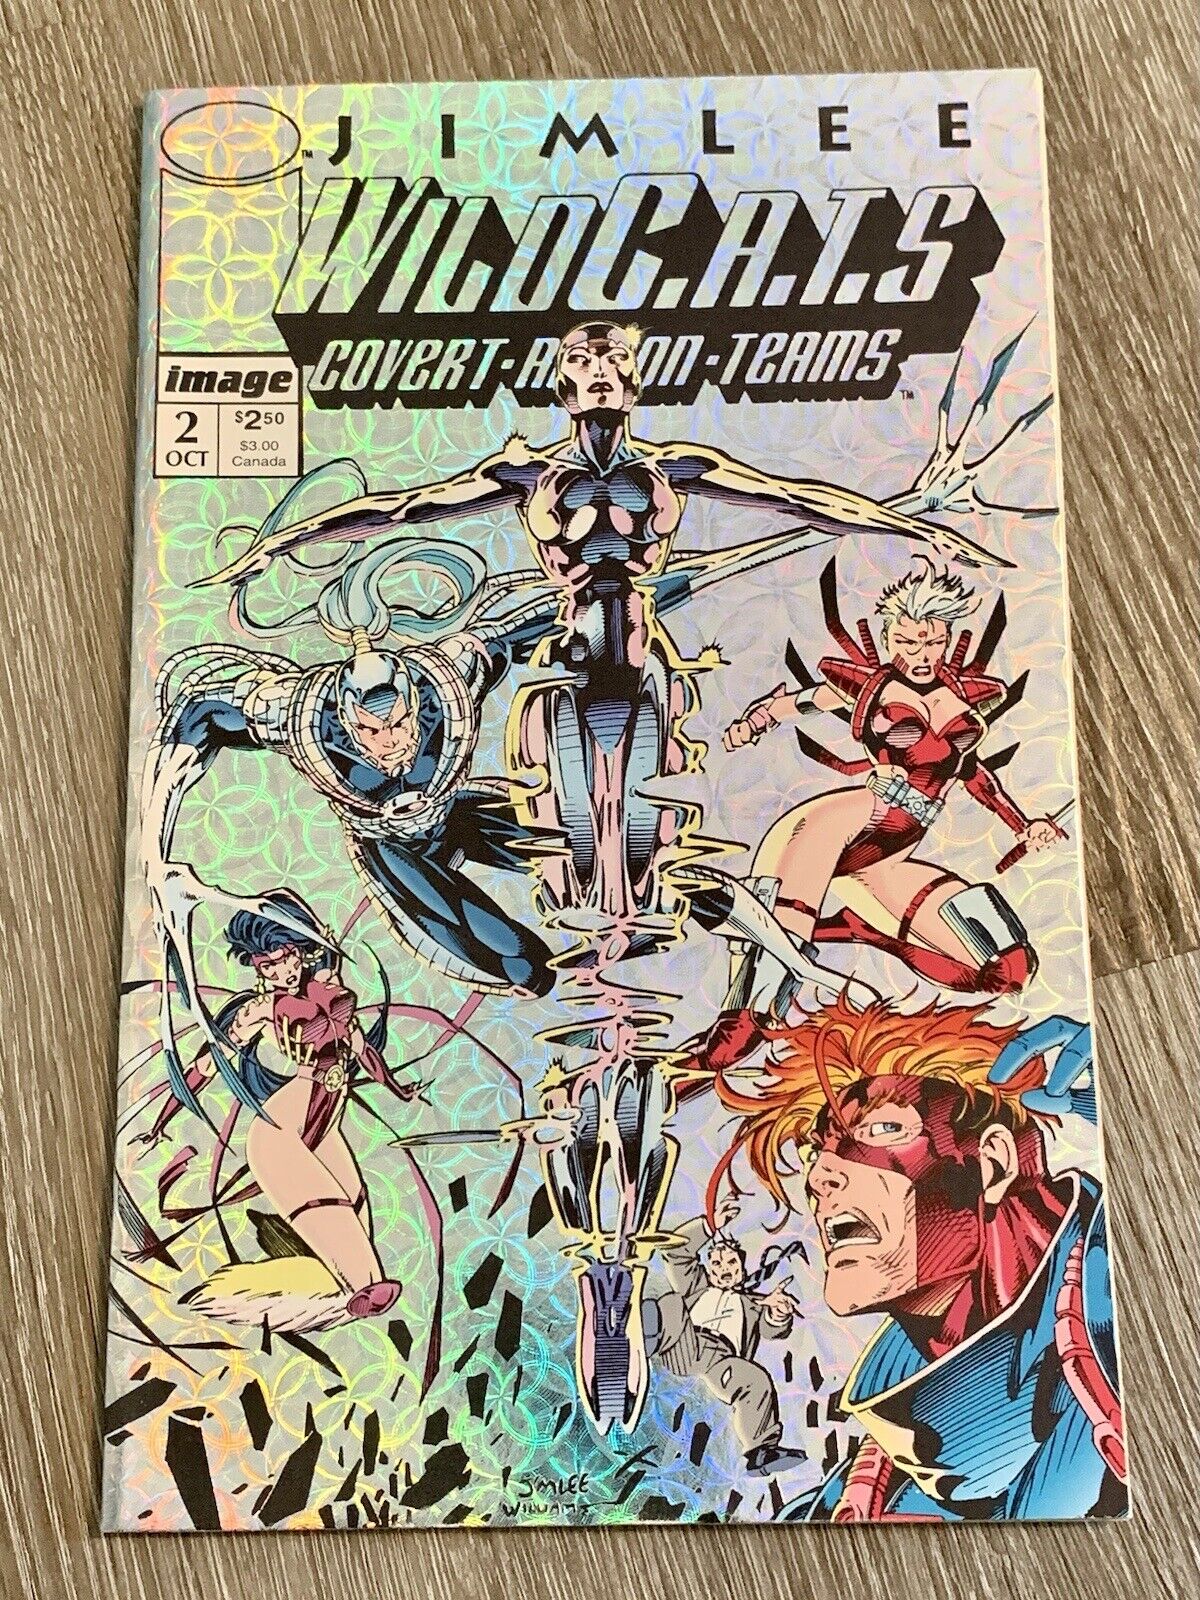 WILDC.A.T.S. Covert-Action-Teams Image Comic #2 Sept 1992 NM First Printing